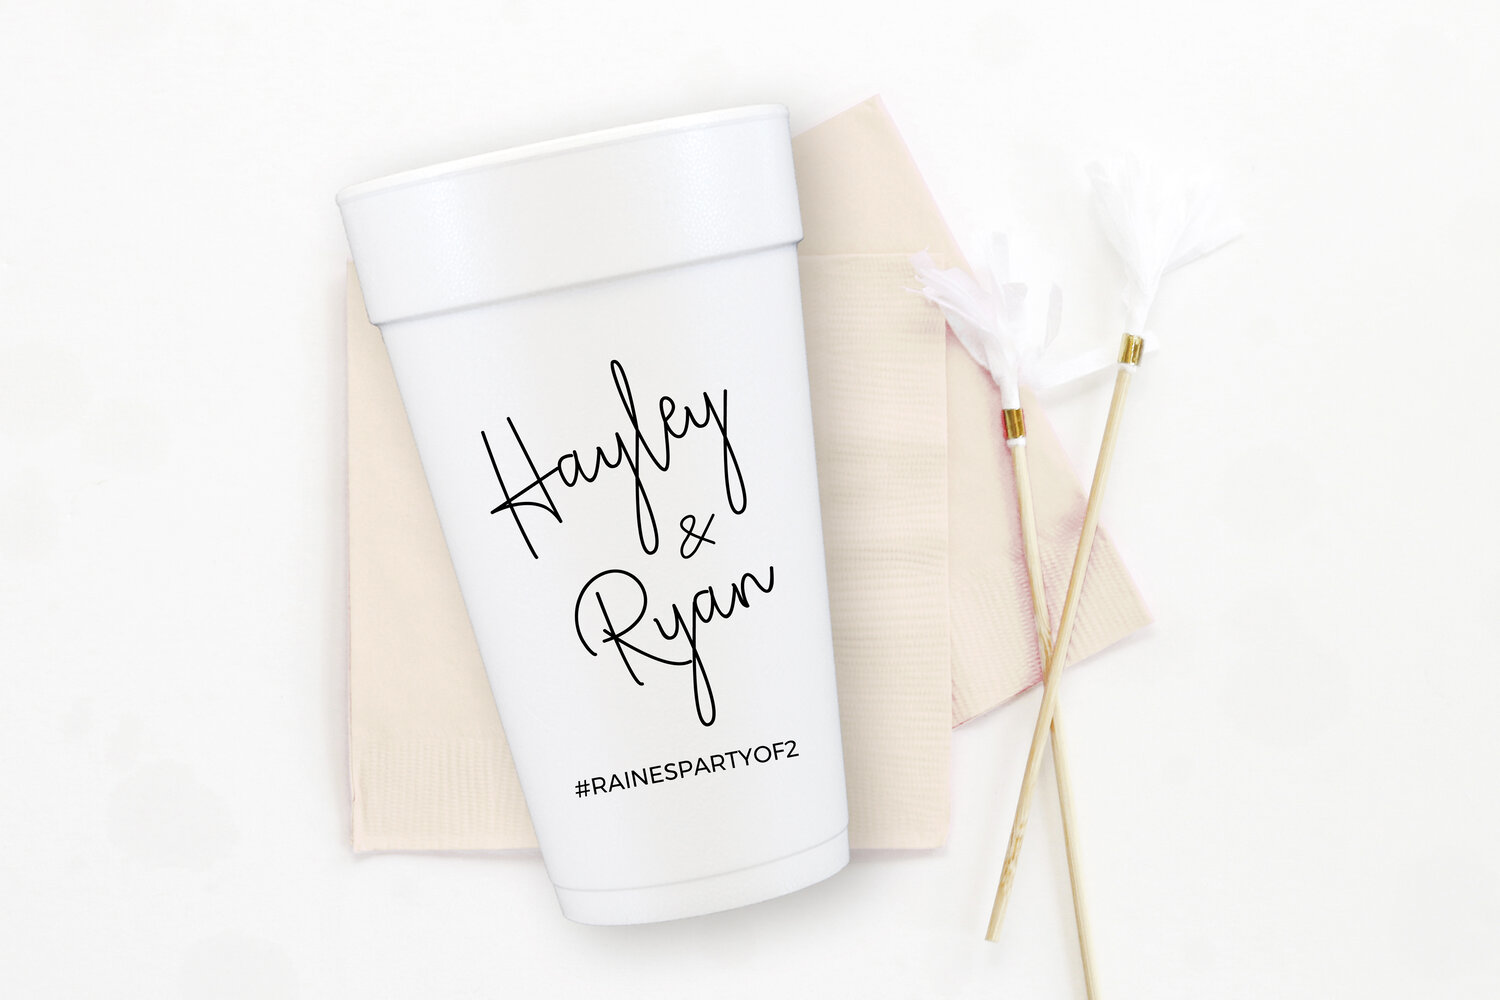 Wedding Cups - Personalized Wedding Cups